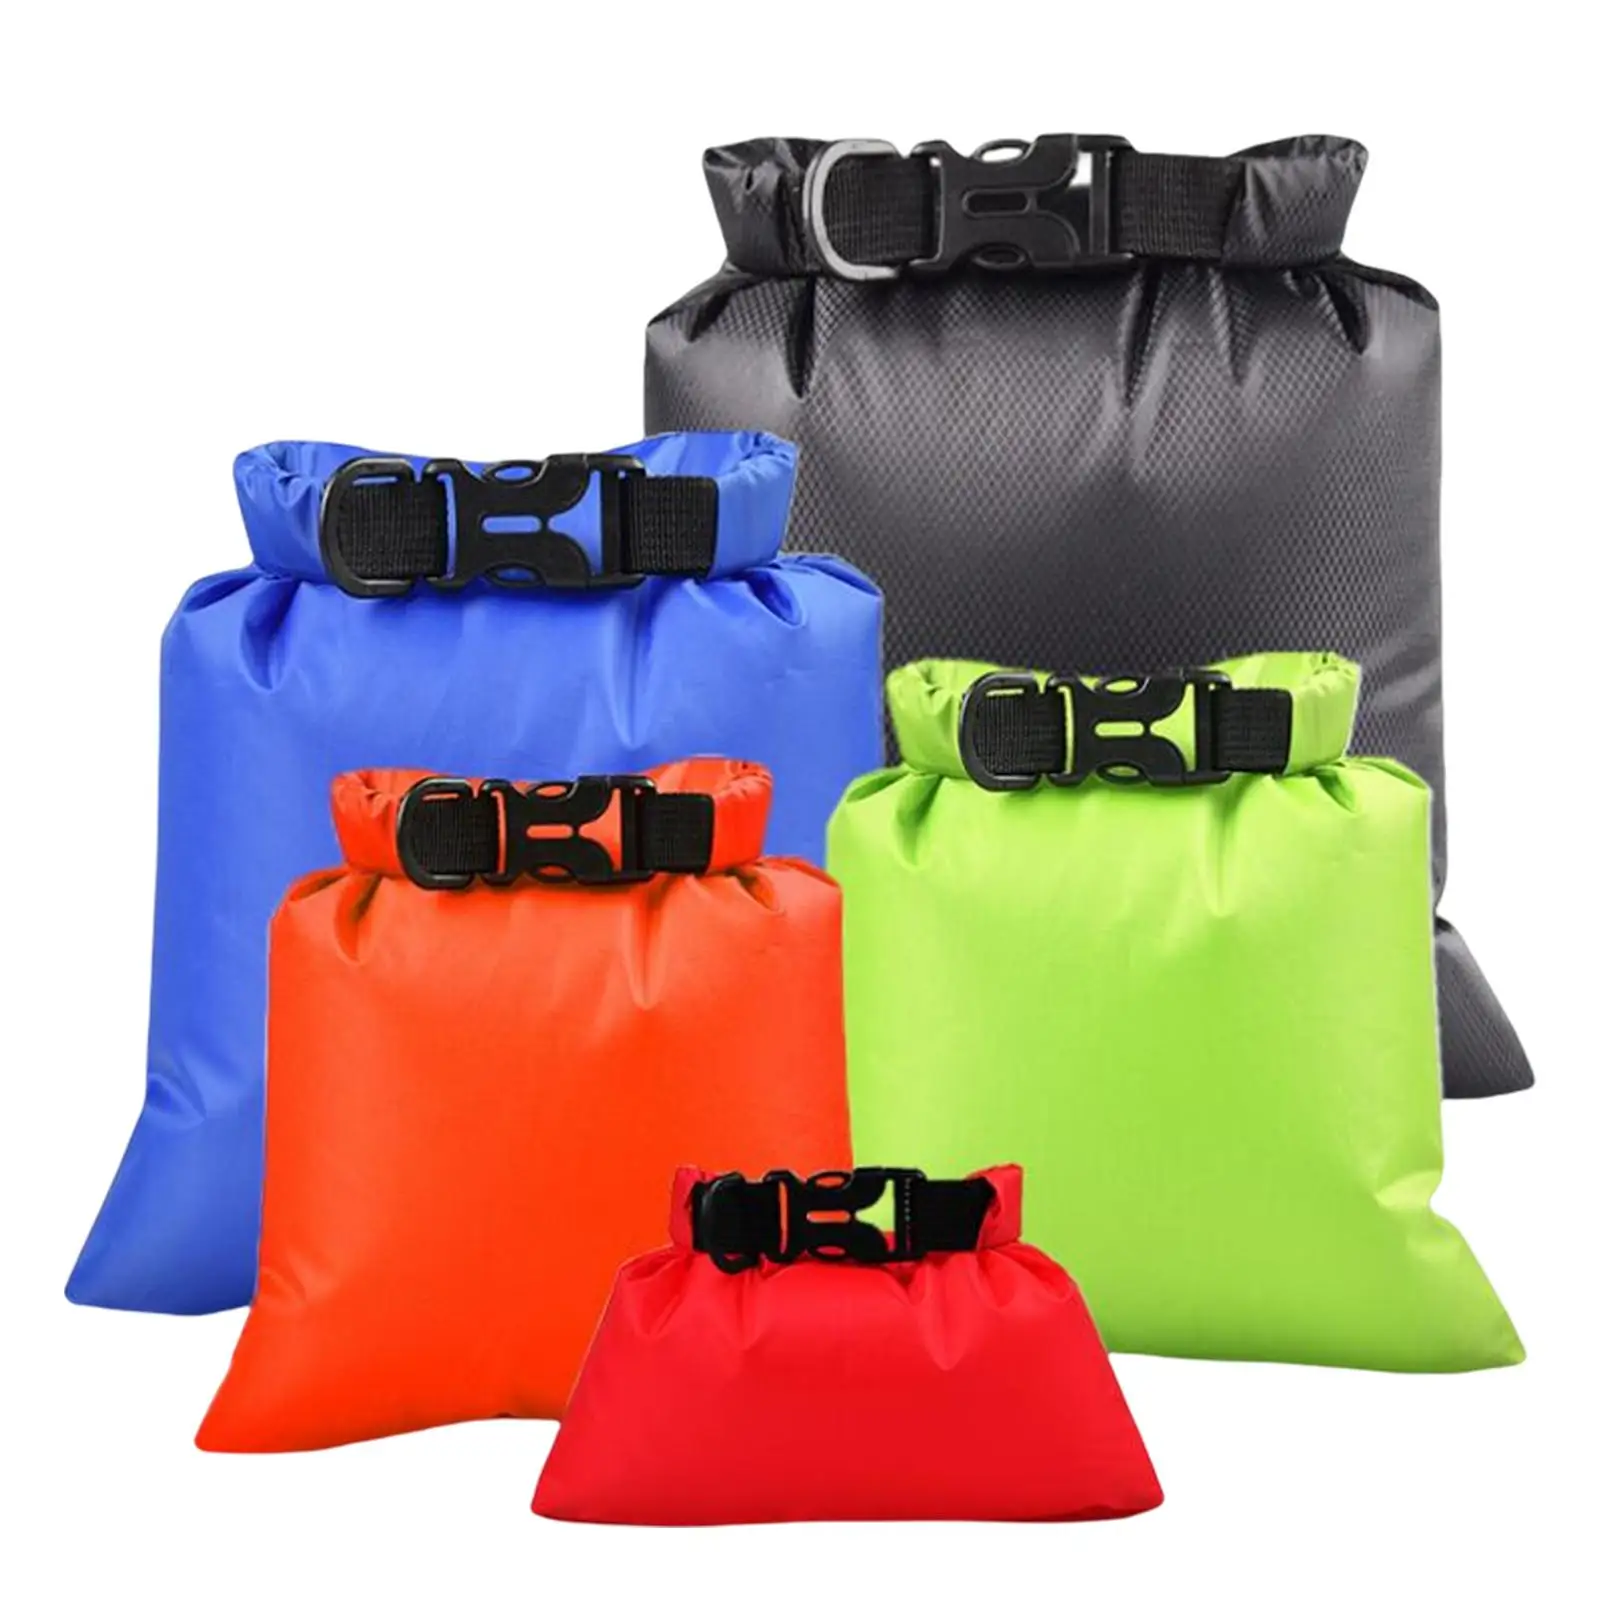 5Pcs Waterproof Dry Bags Lightweight Foldable Floating Dry Sacks Keeps Gear Dry for Swimming Outdoor Camping Travel Fishing Gym